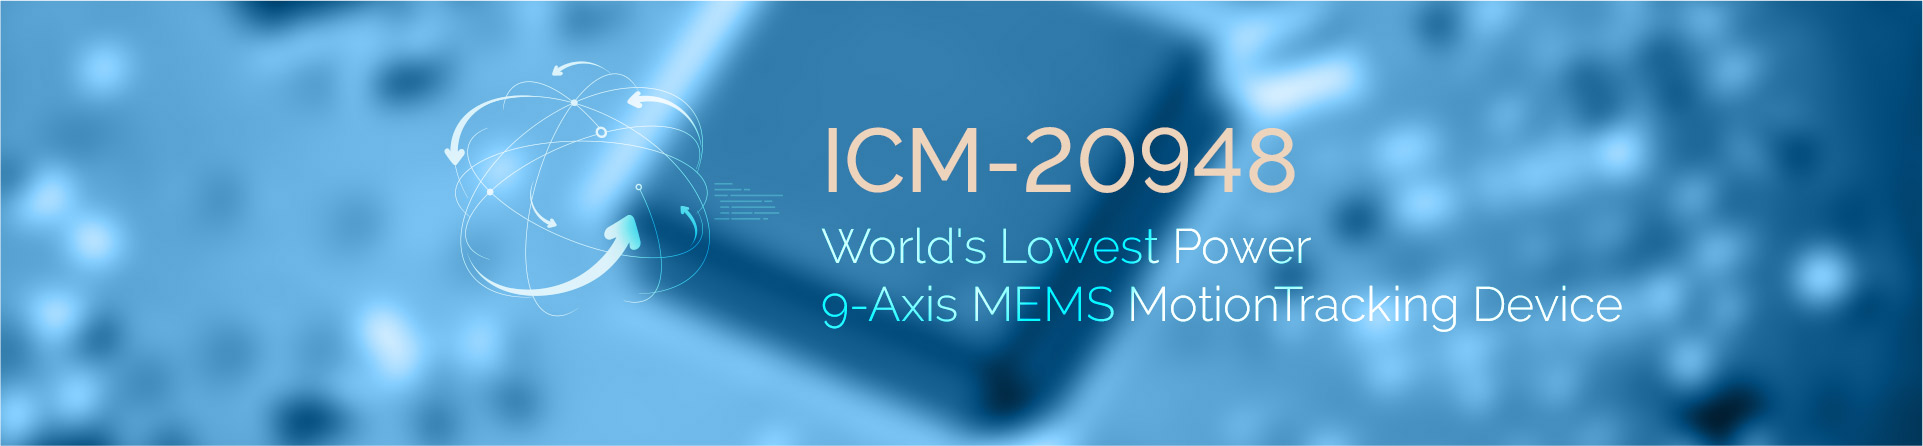 ICM-20948 - World’s Lowest Power 9-Axis MEMS MotionTracking™ Device